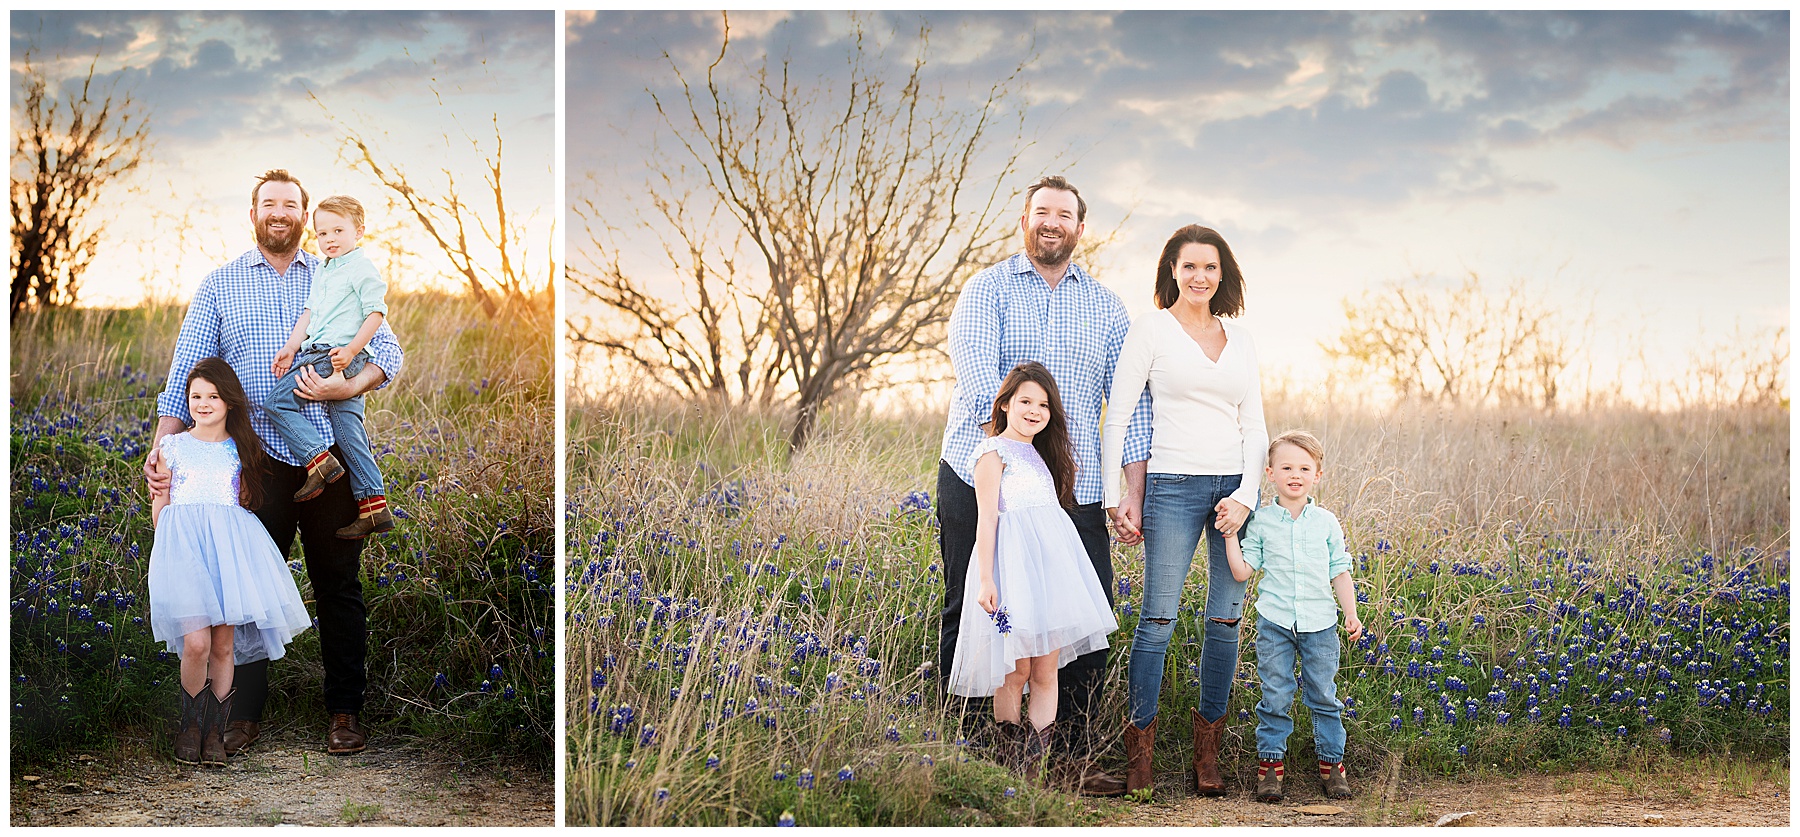 family photos in the bluebonnets to end the evening